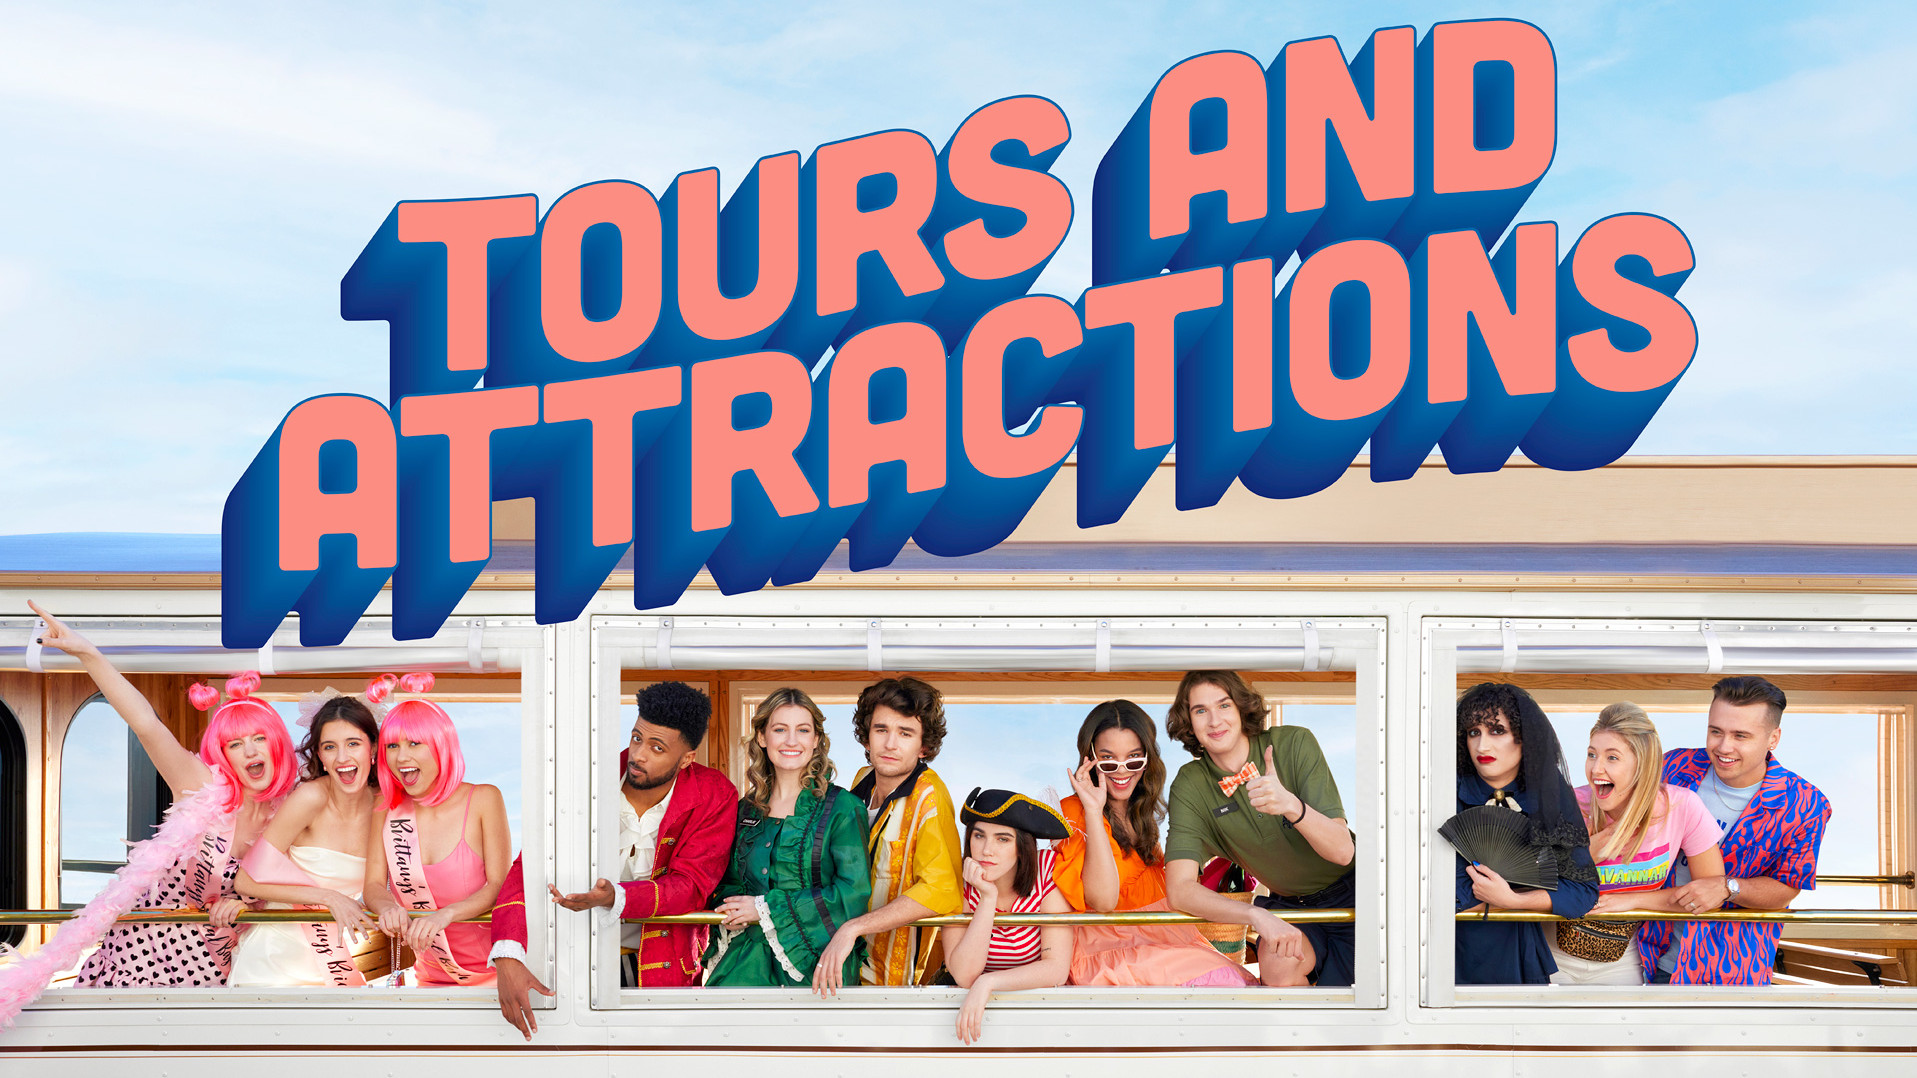 scad tours and attractions